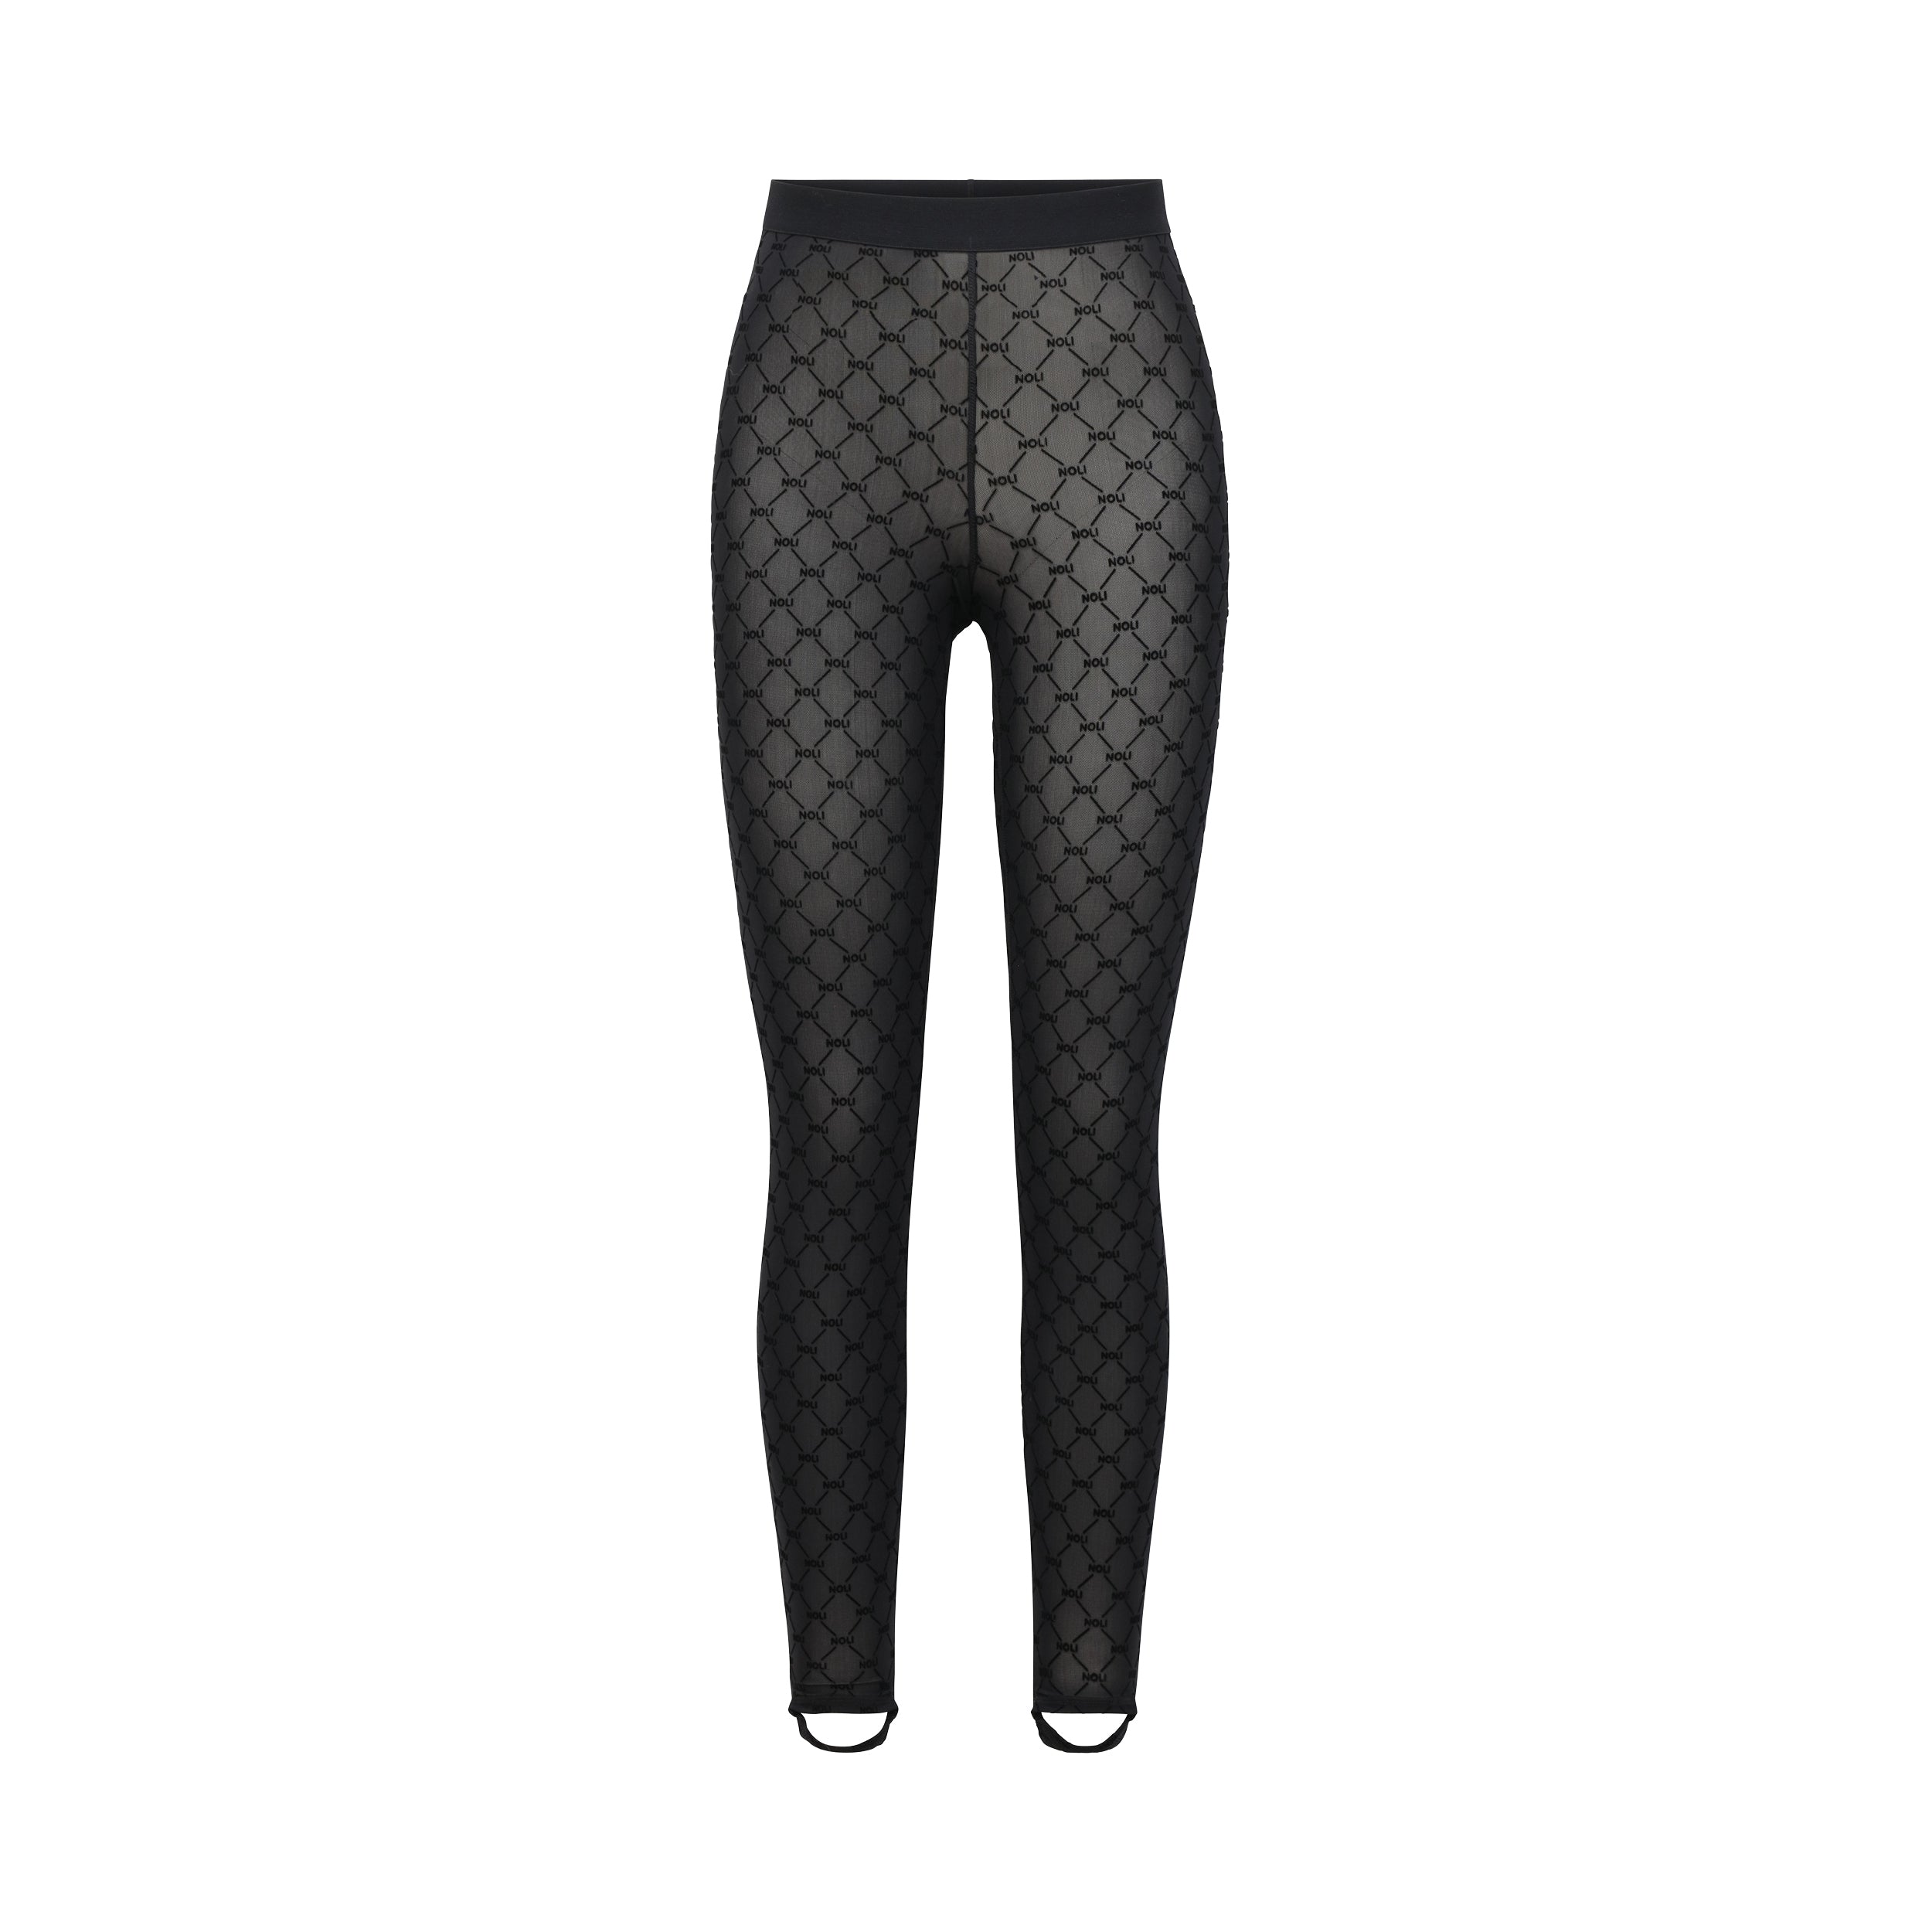 Product view of tights featuring ultra-soft and comfortable NOLI monogram mesh, slip this four-way stretch mesh